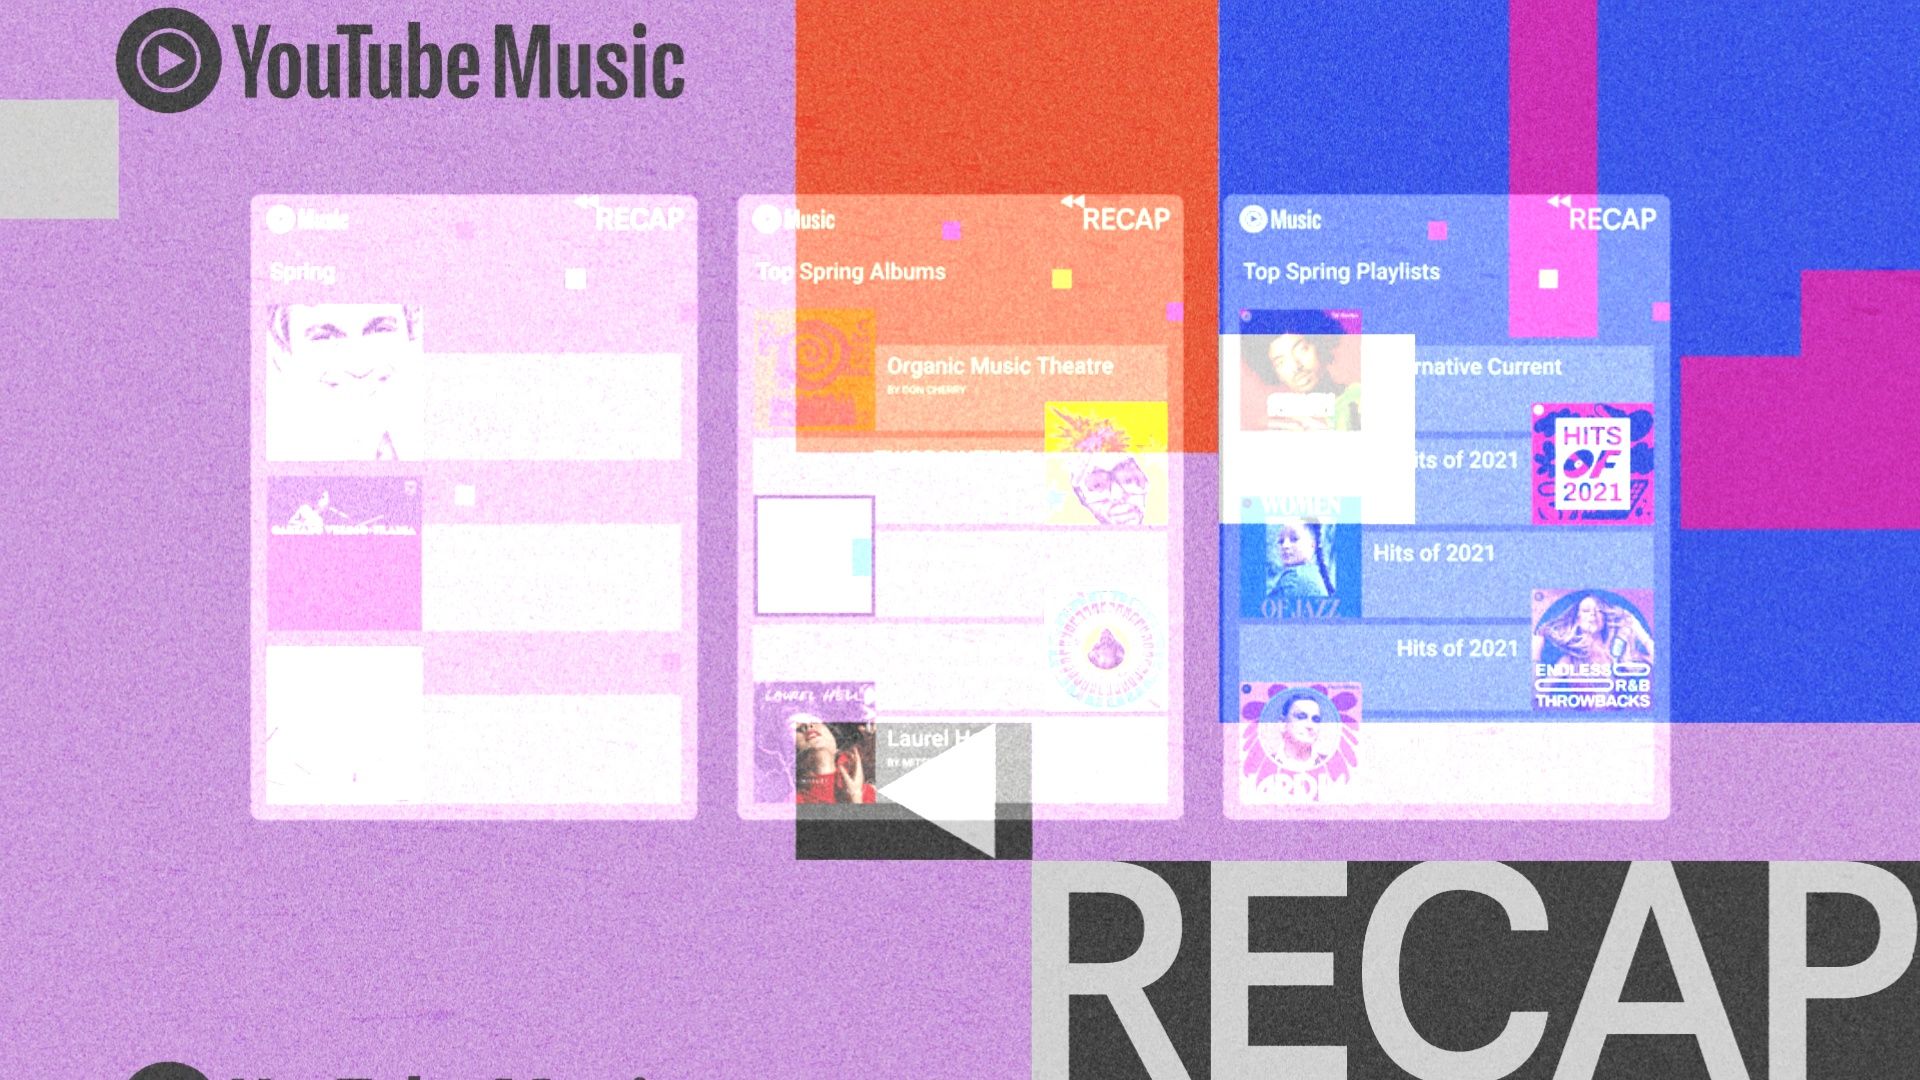 YouTube Music's Spring Recaps are official Flipboard